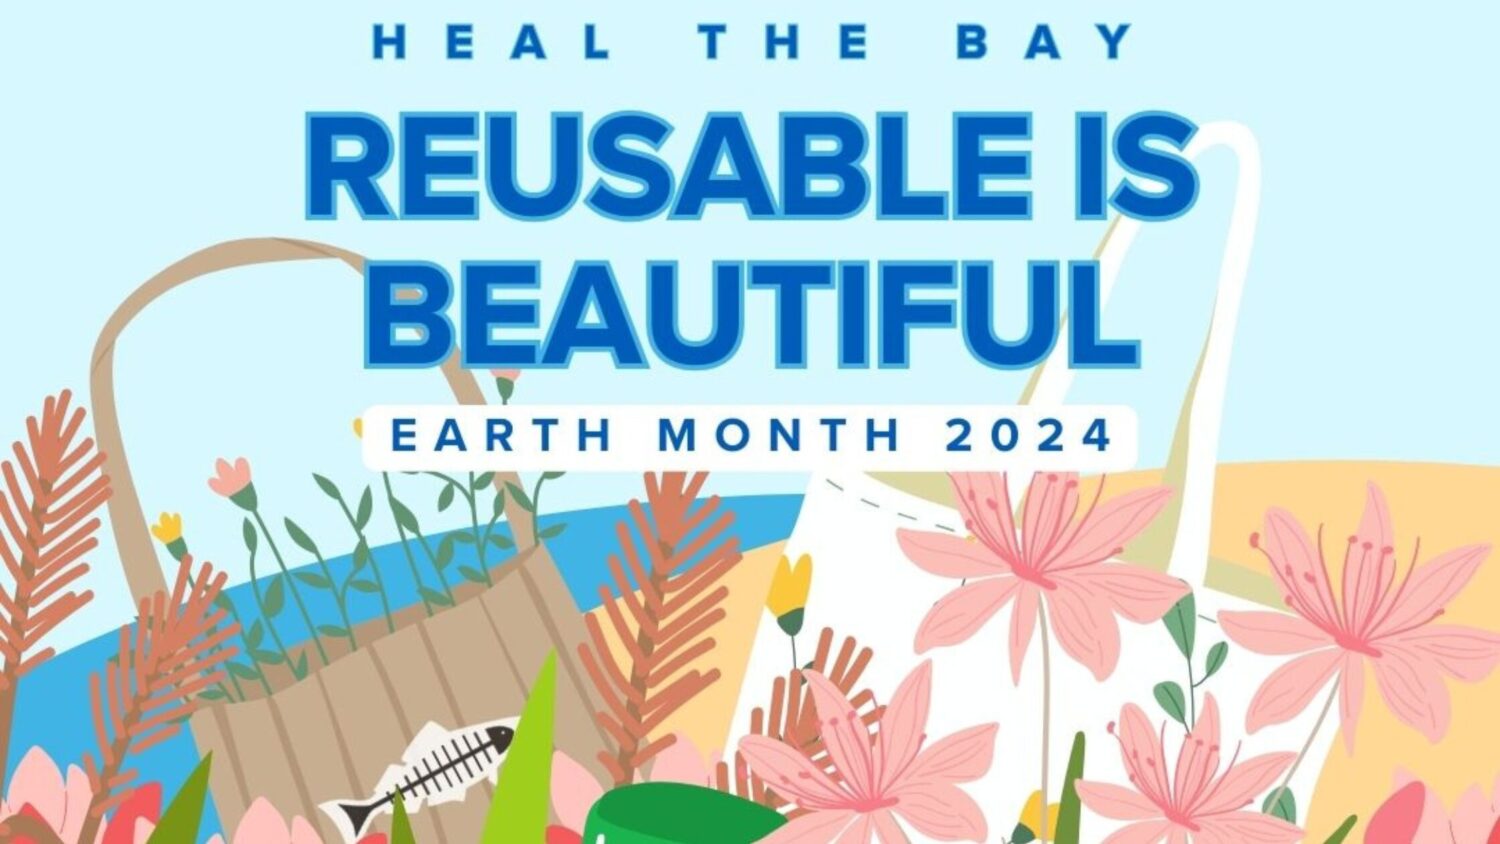 Heal the Bay Reusable is Beautiful. Earth Month 2024